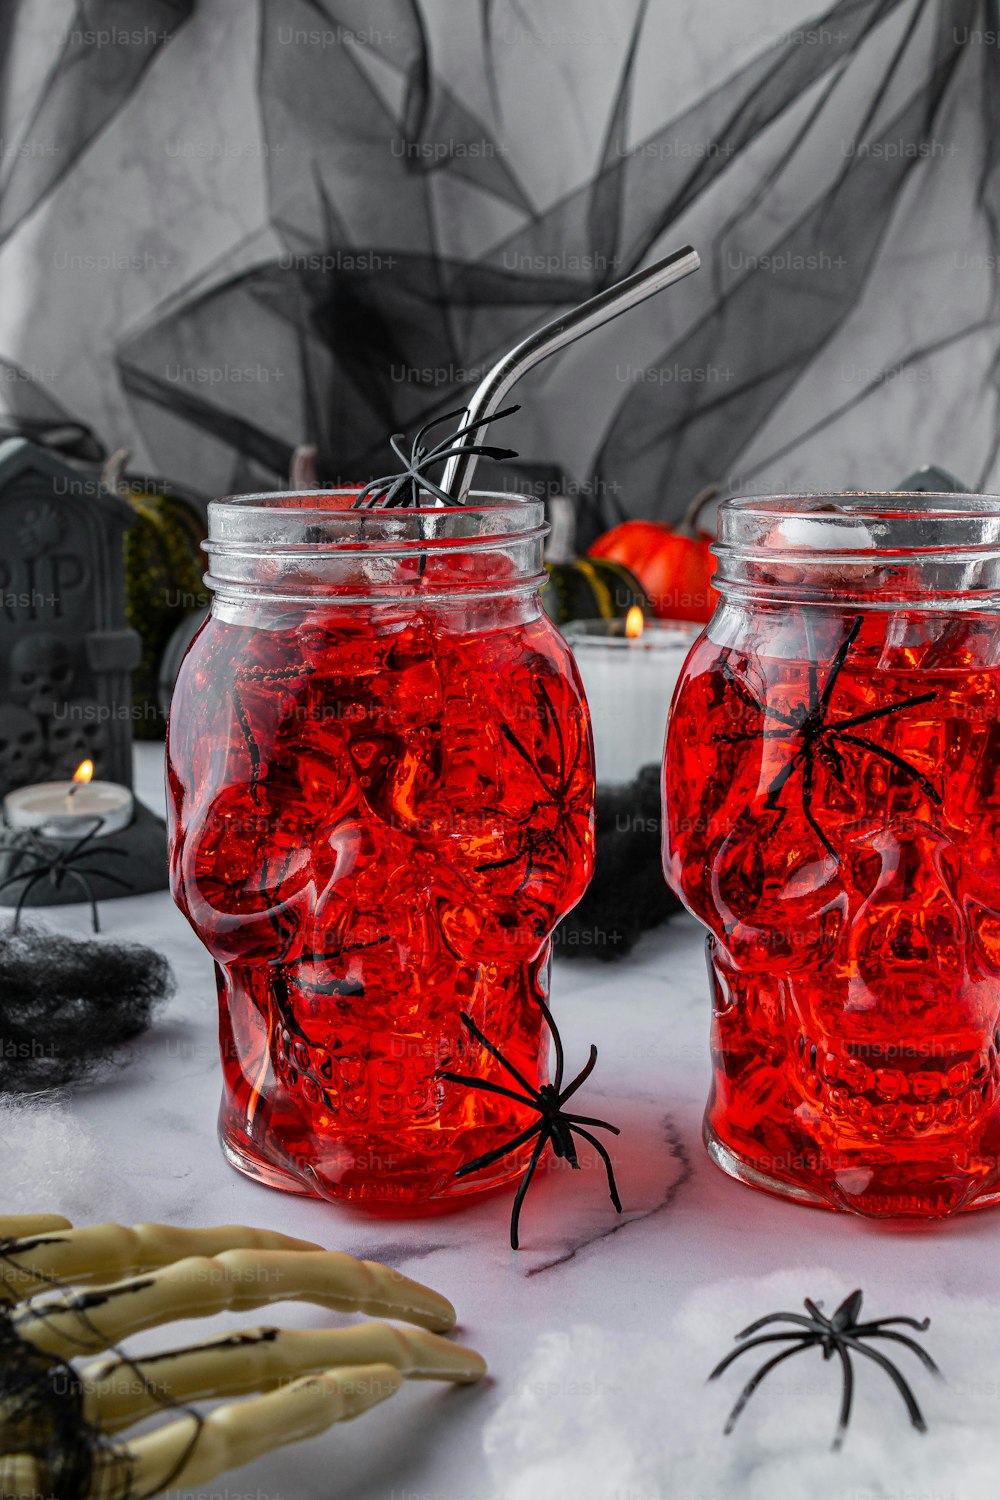 a couple of jars filled with red liquid